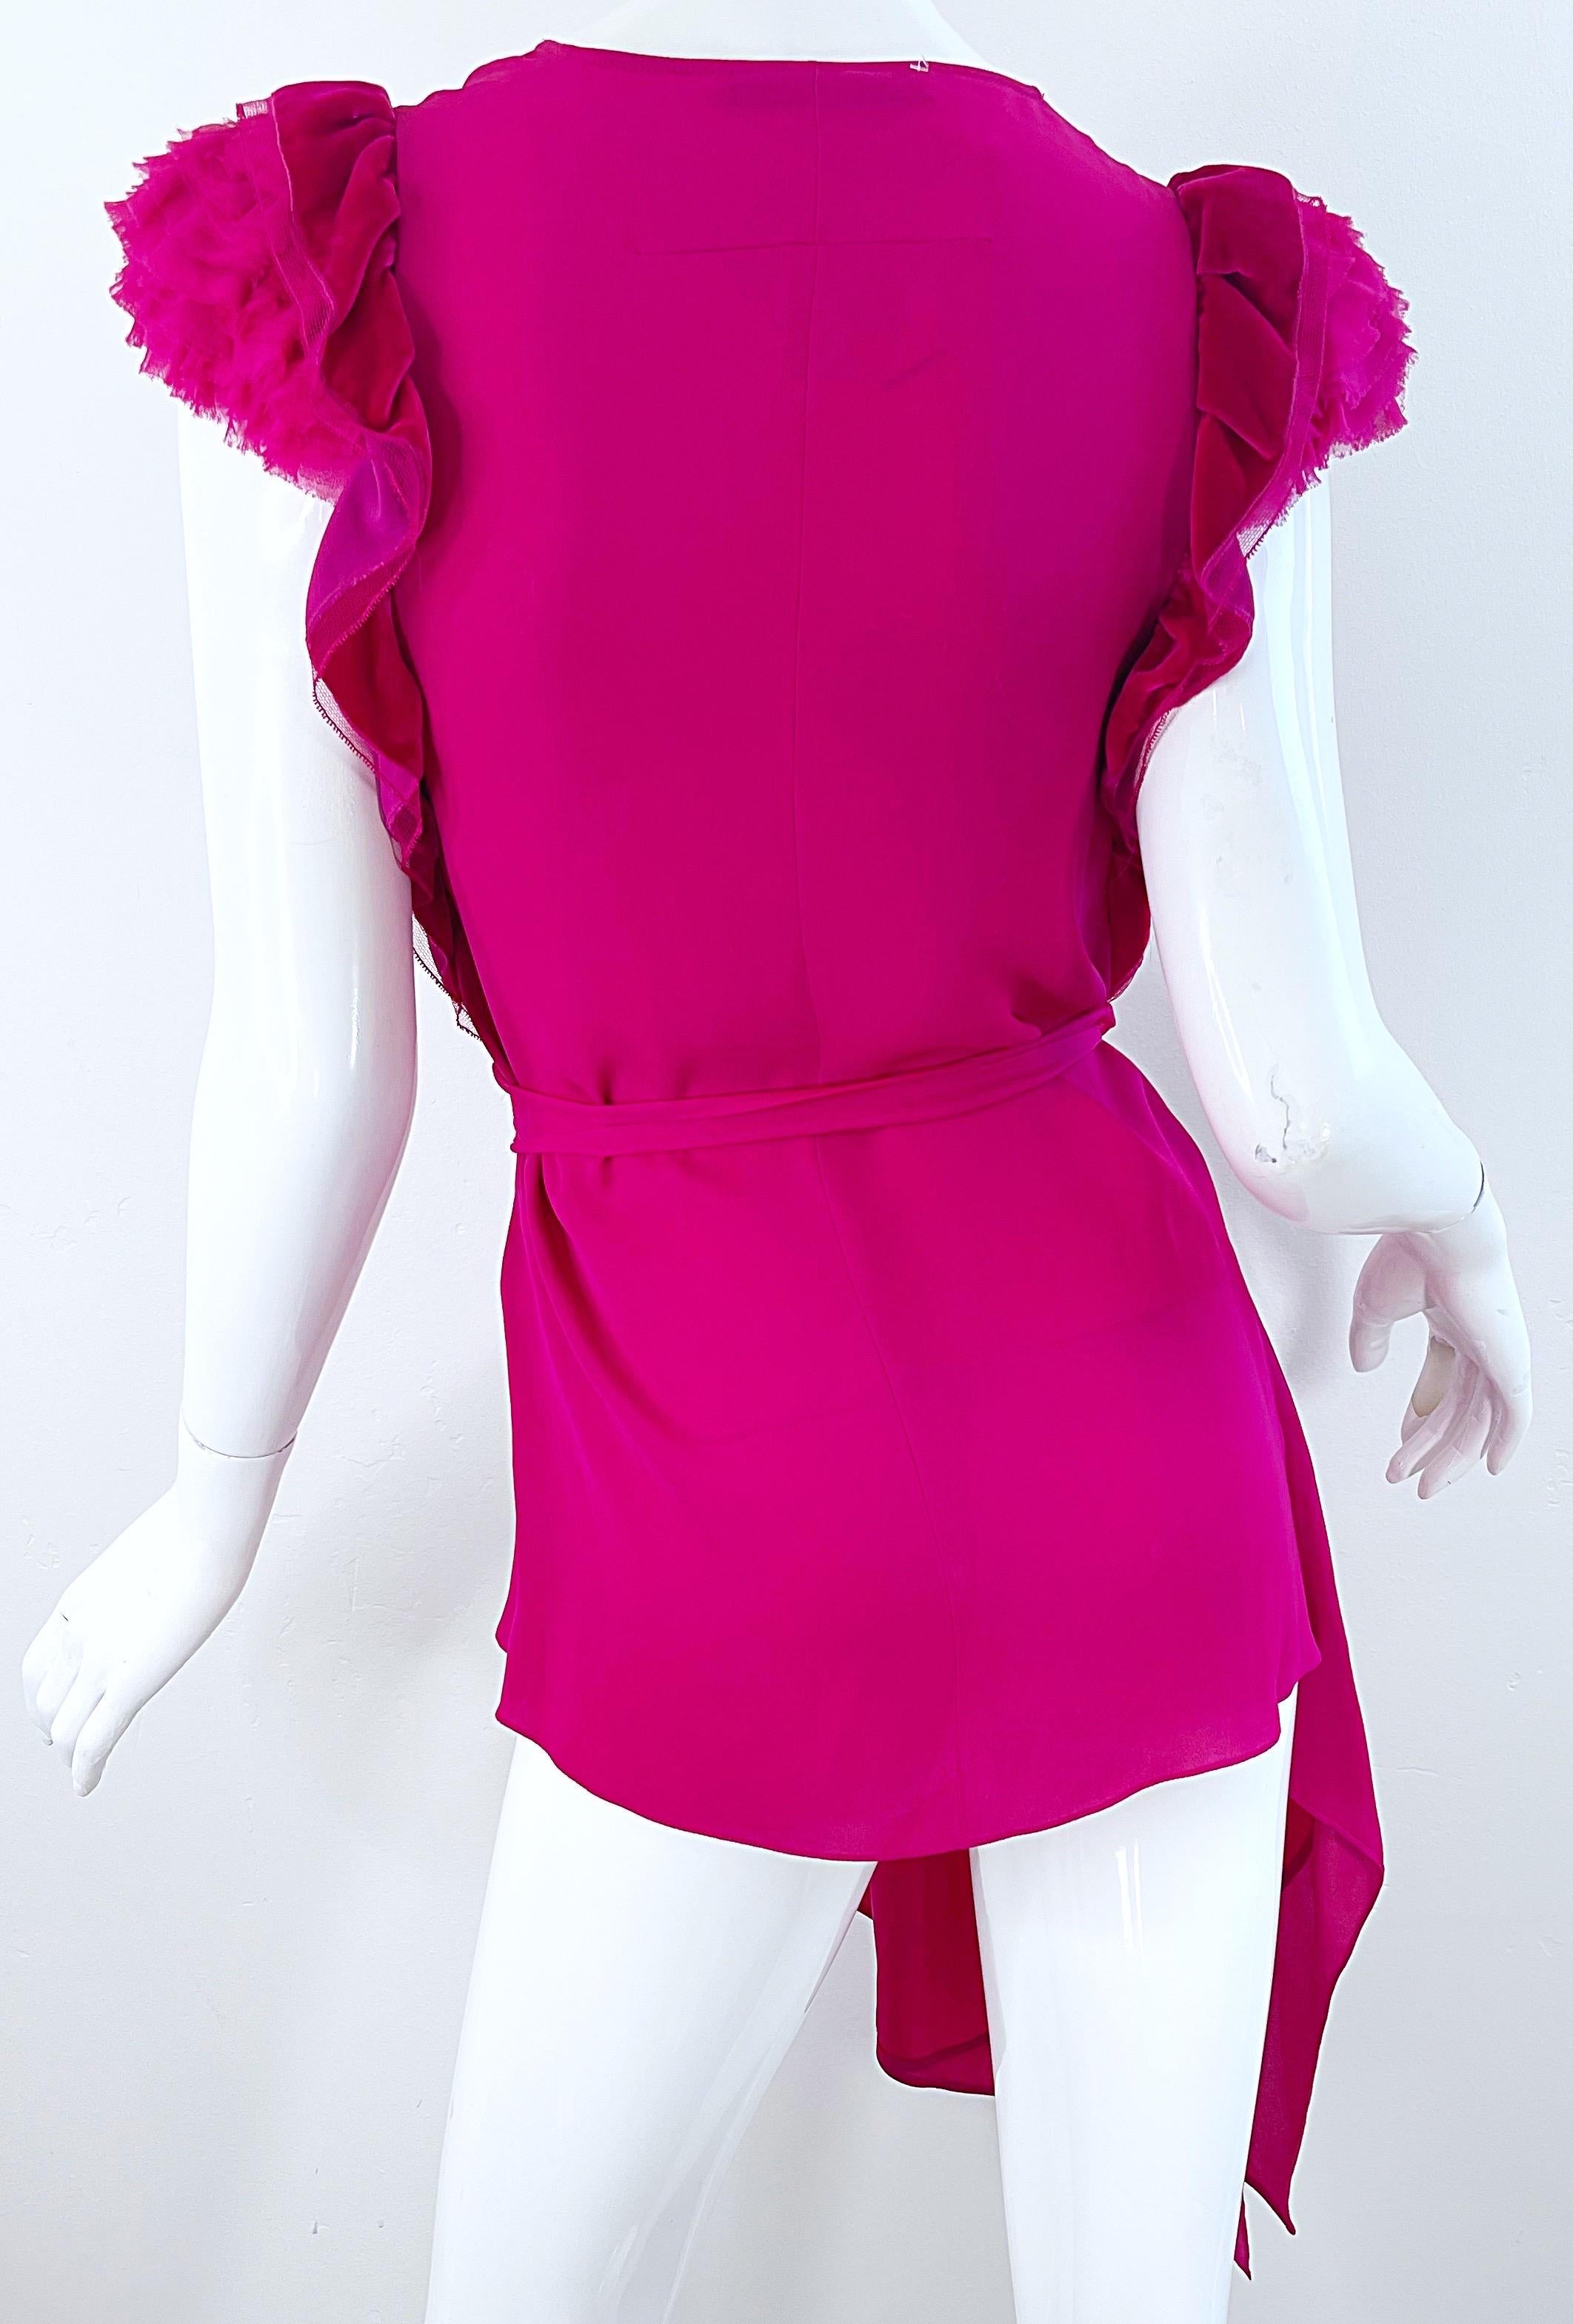 NWT Givenchy Spring 2020 Size 34 / 2 - 4 Hot Pink Fuchsia Silk Belted Blouse Top For Sale 4